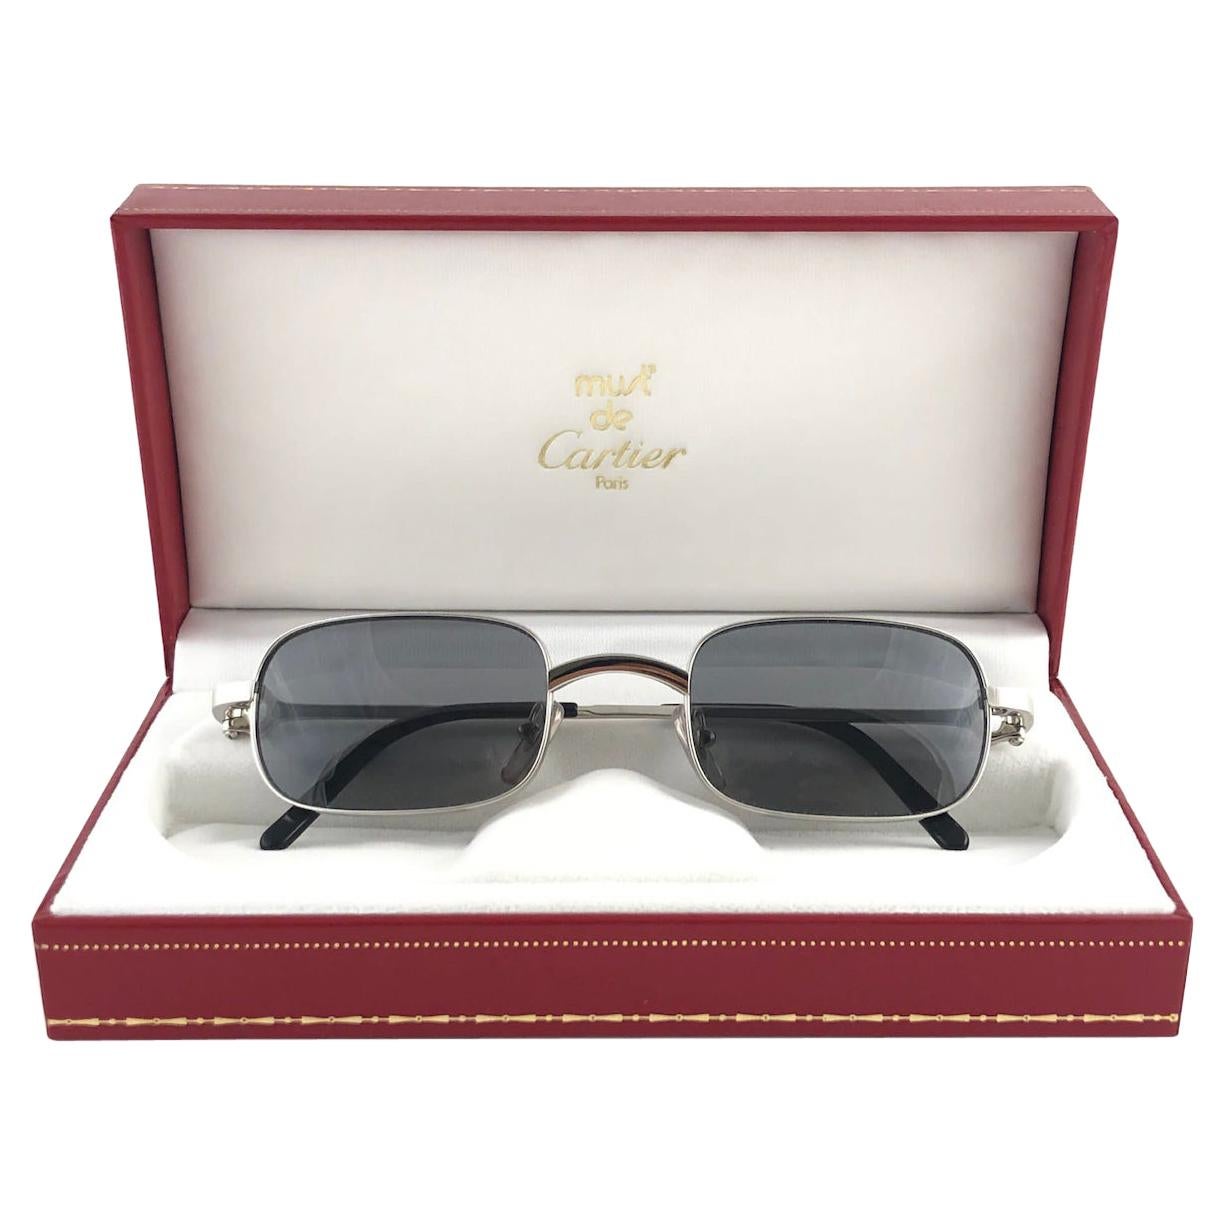 New Cartier Temper 50mm Platine Plated Sunglasses France